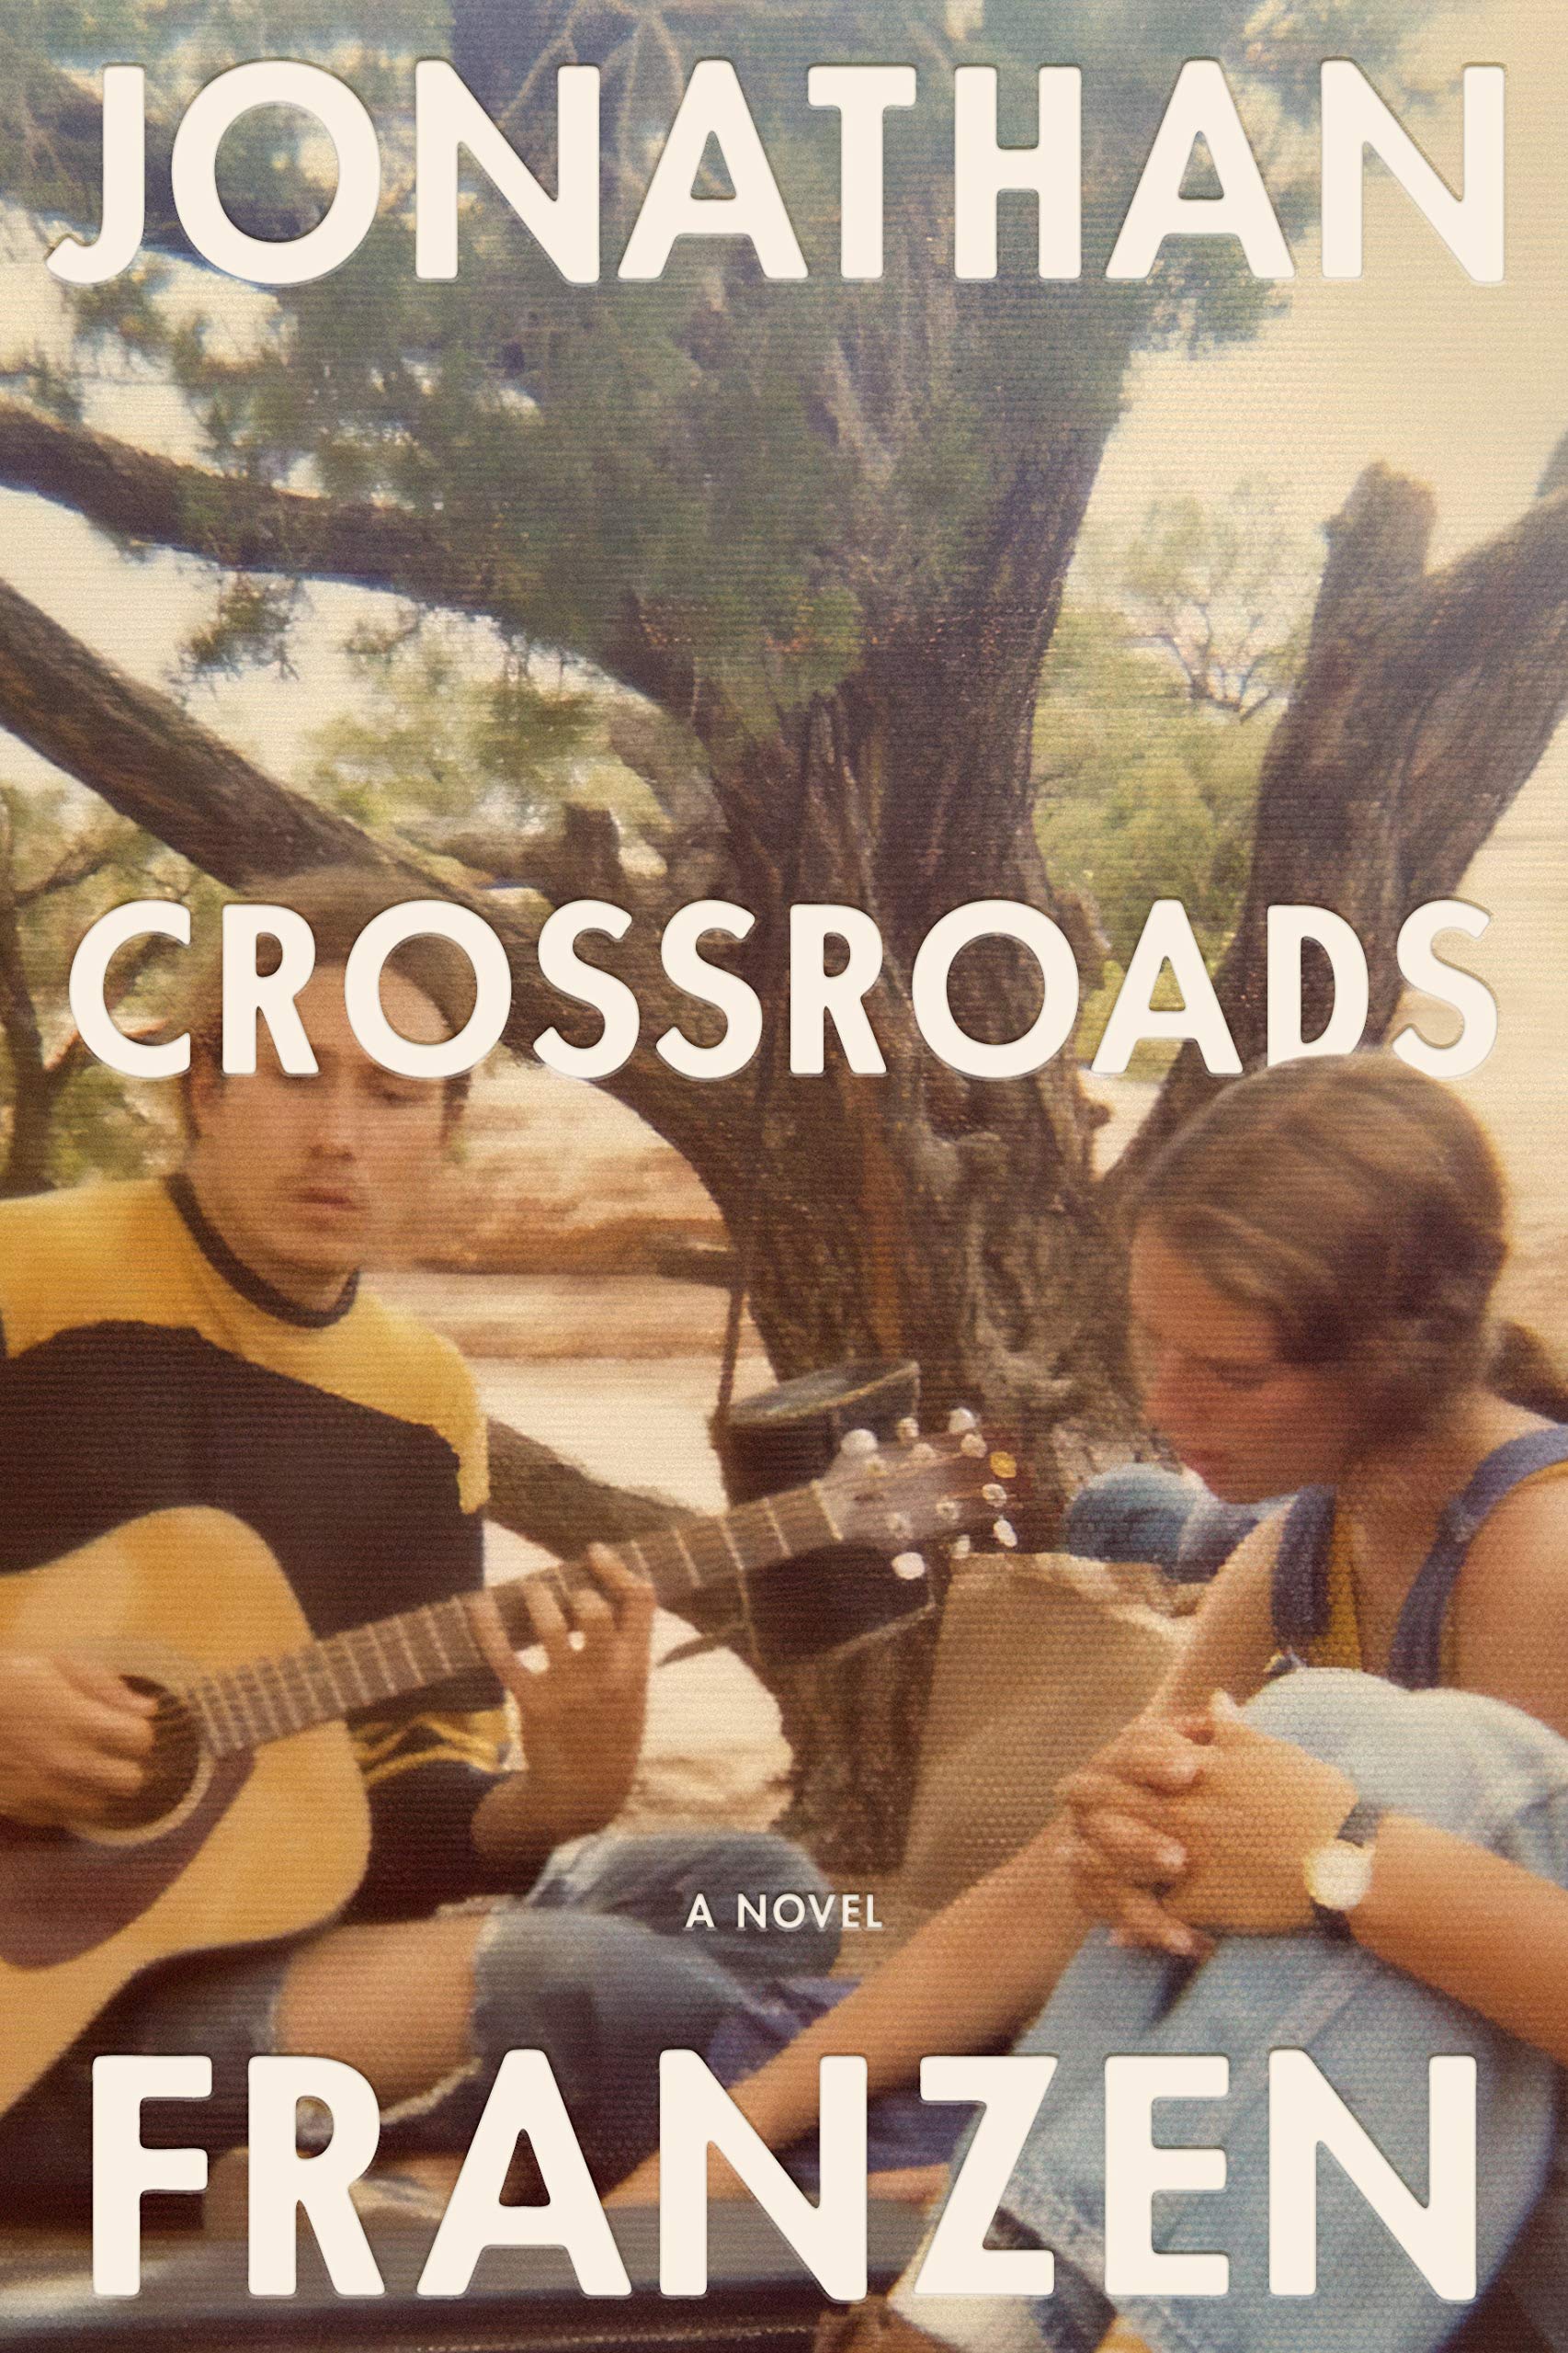 The cover of Crossroads